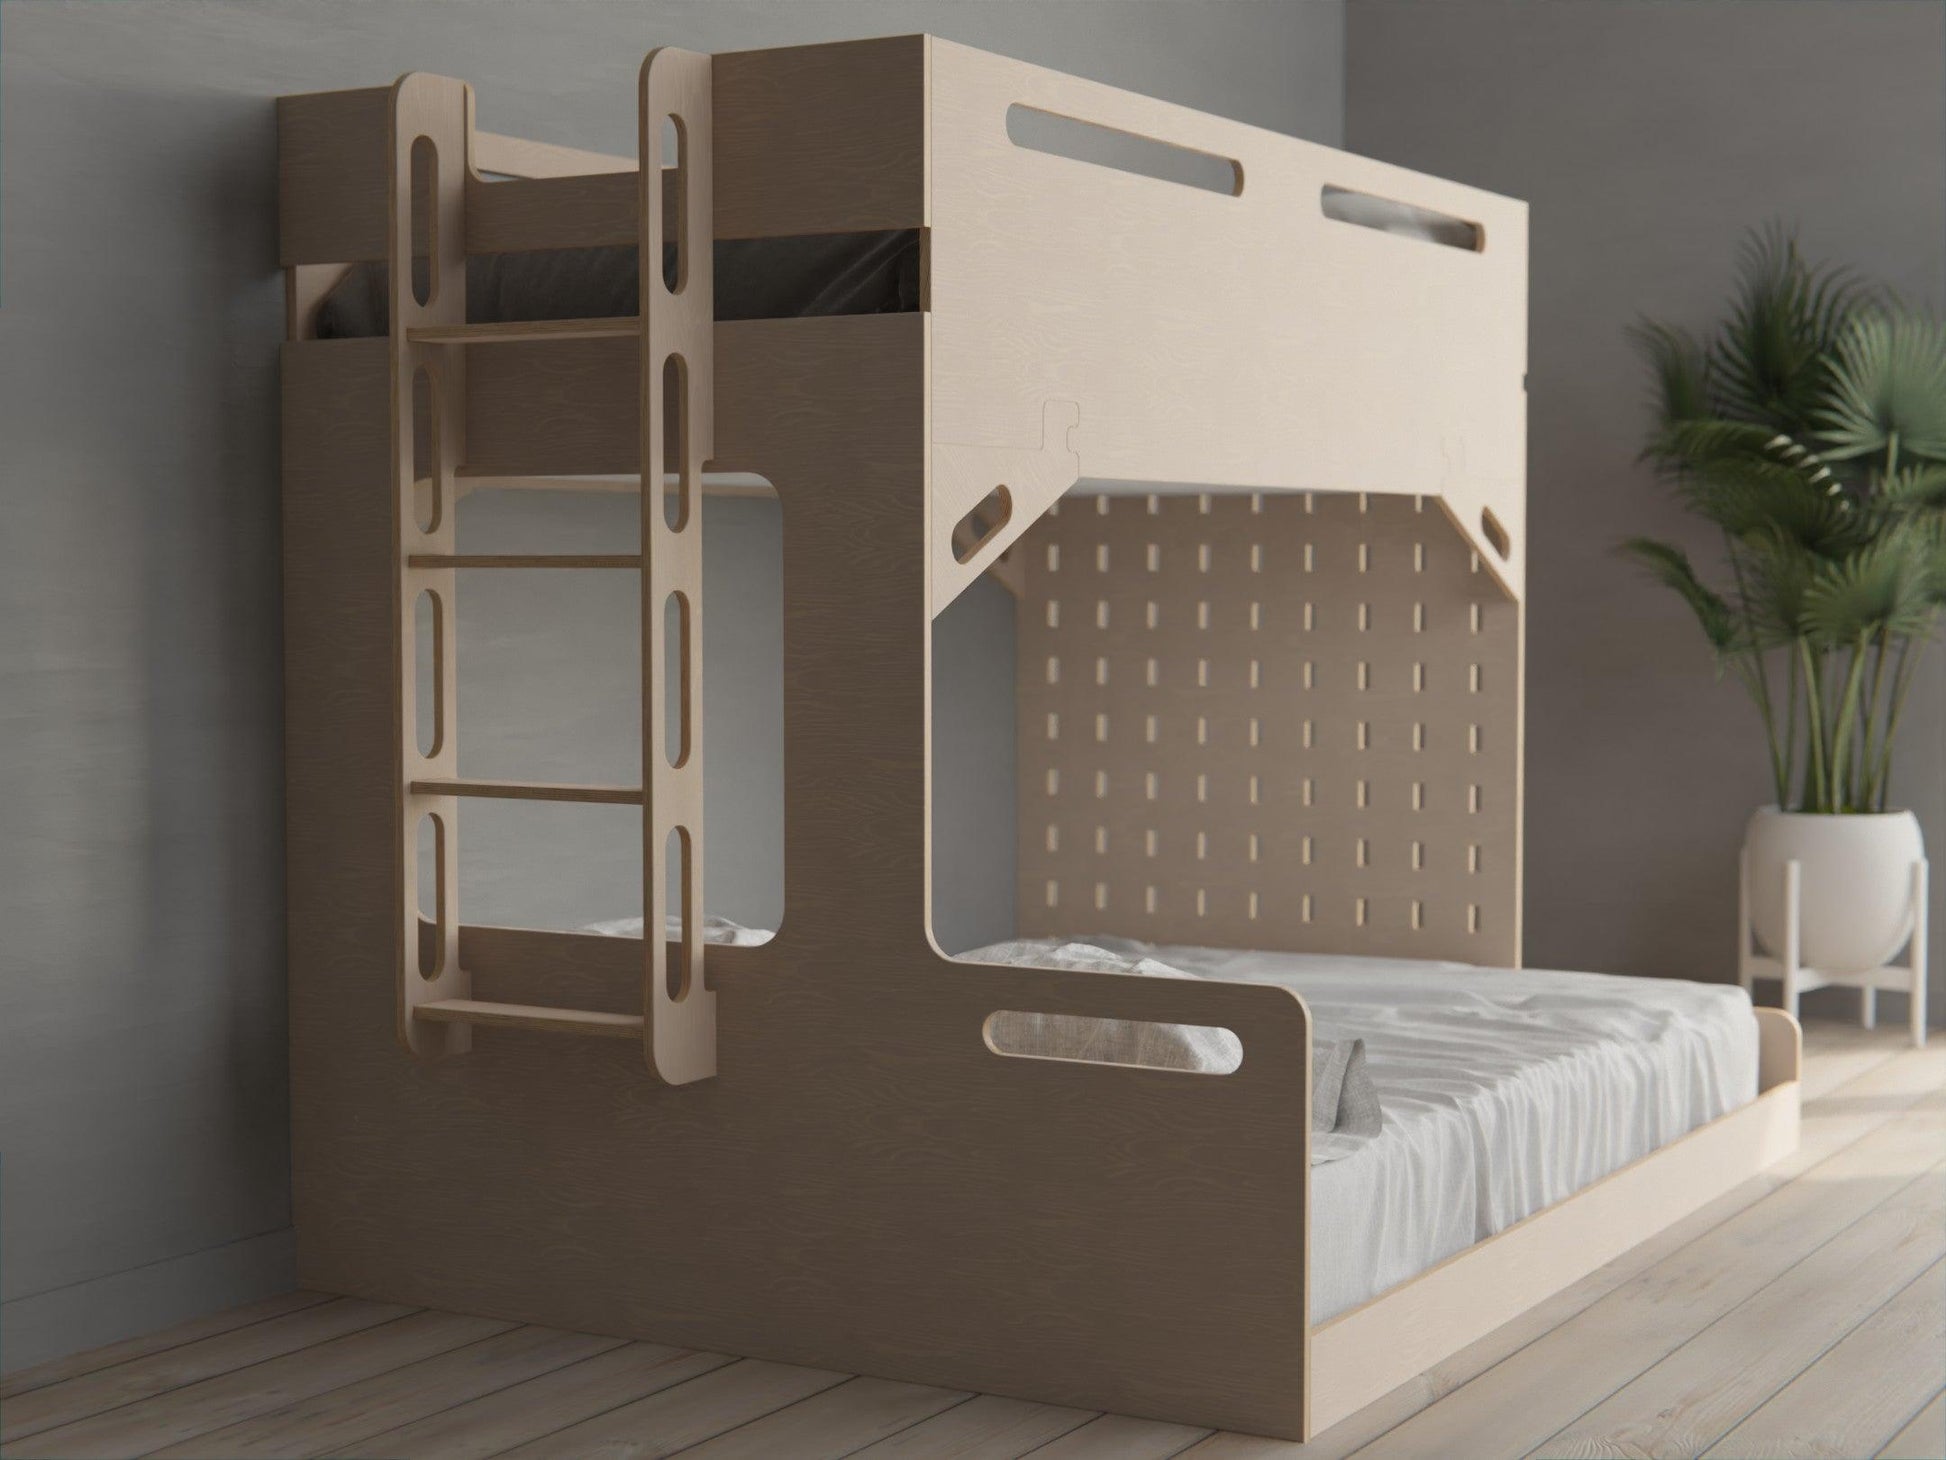 Efficiency meets elegance in our plywood triple bunk beds. Save space without compromising comfort or style.